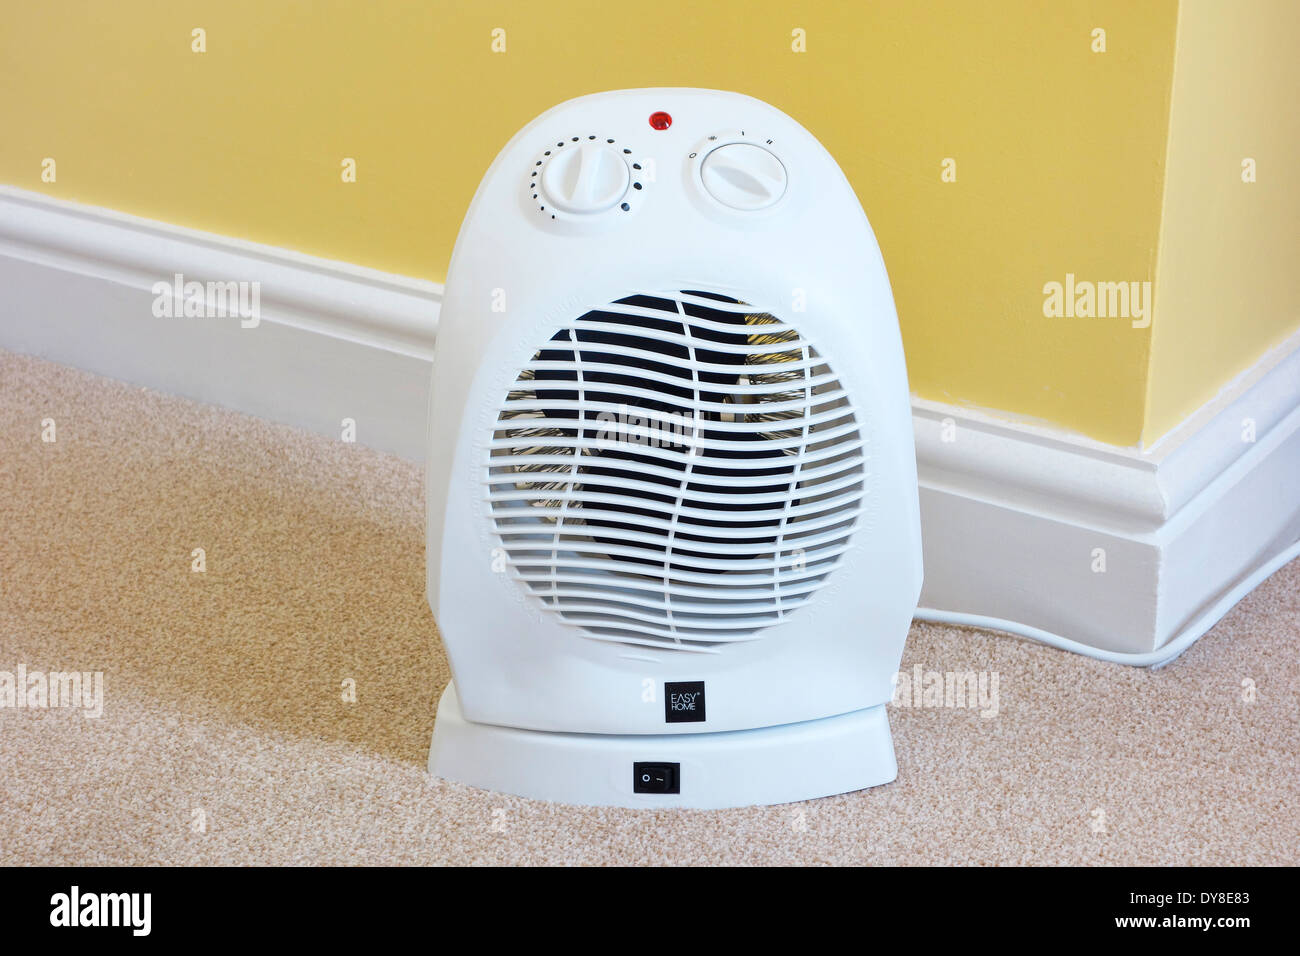 Electric Oscillating Fan in a Domestic Room, UK Stock Photo